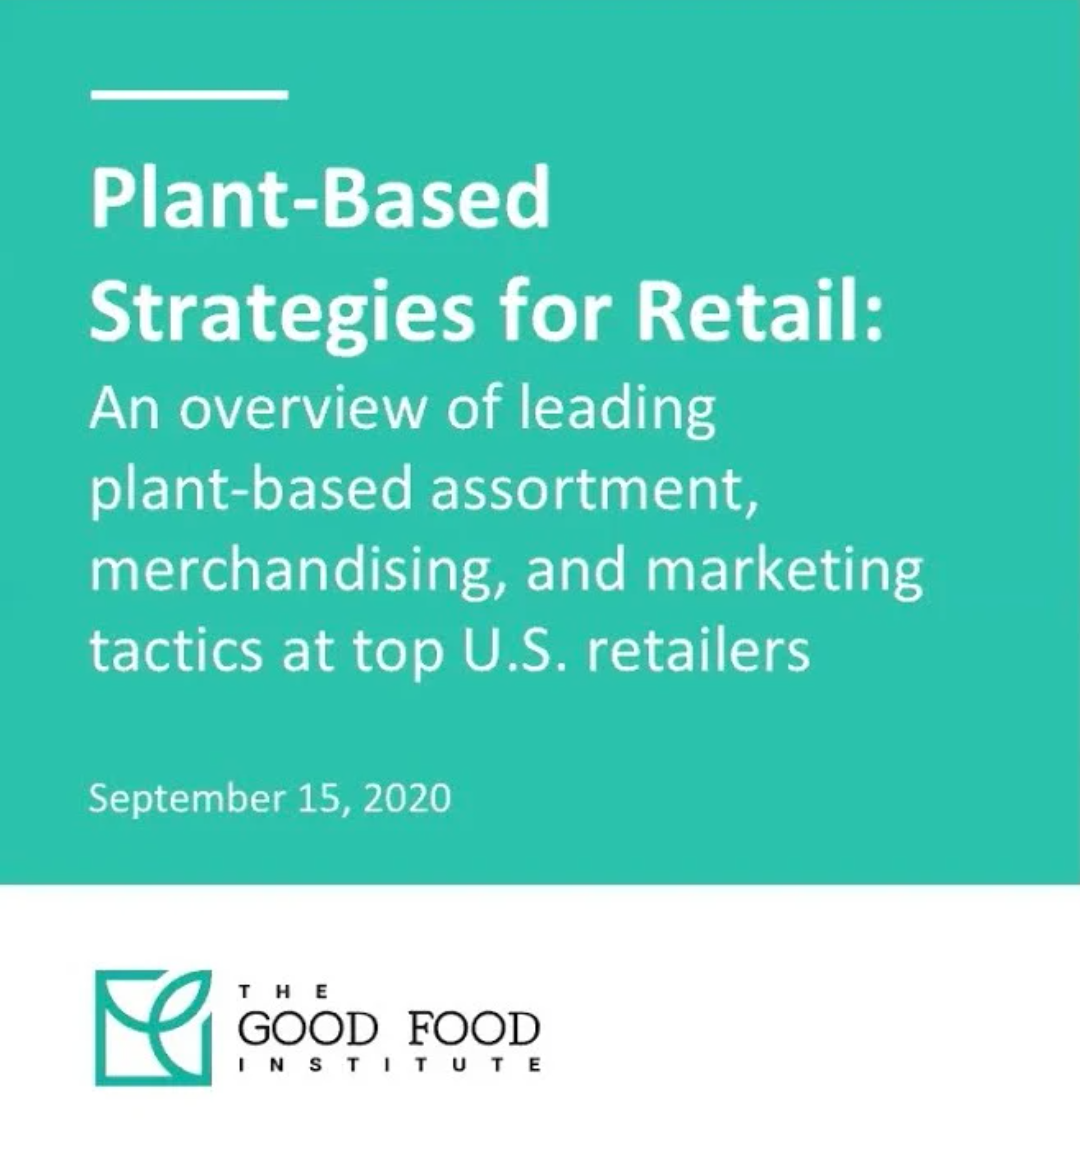 Screenshot from the plant-based strategies for retail webinar